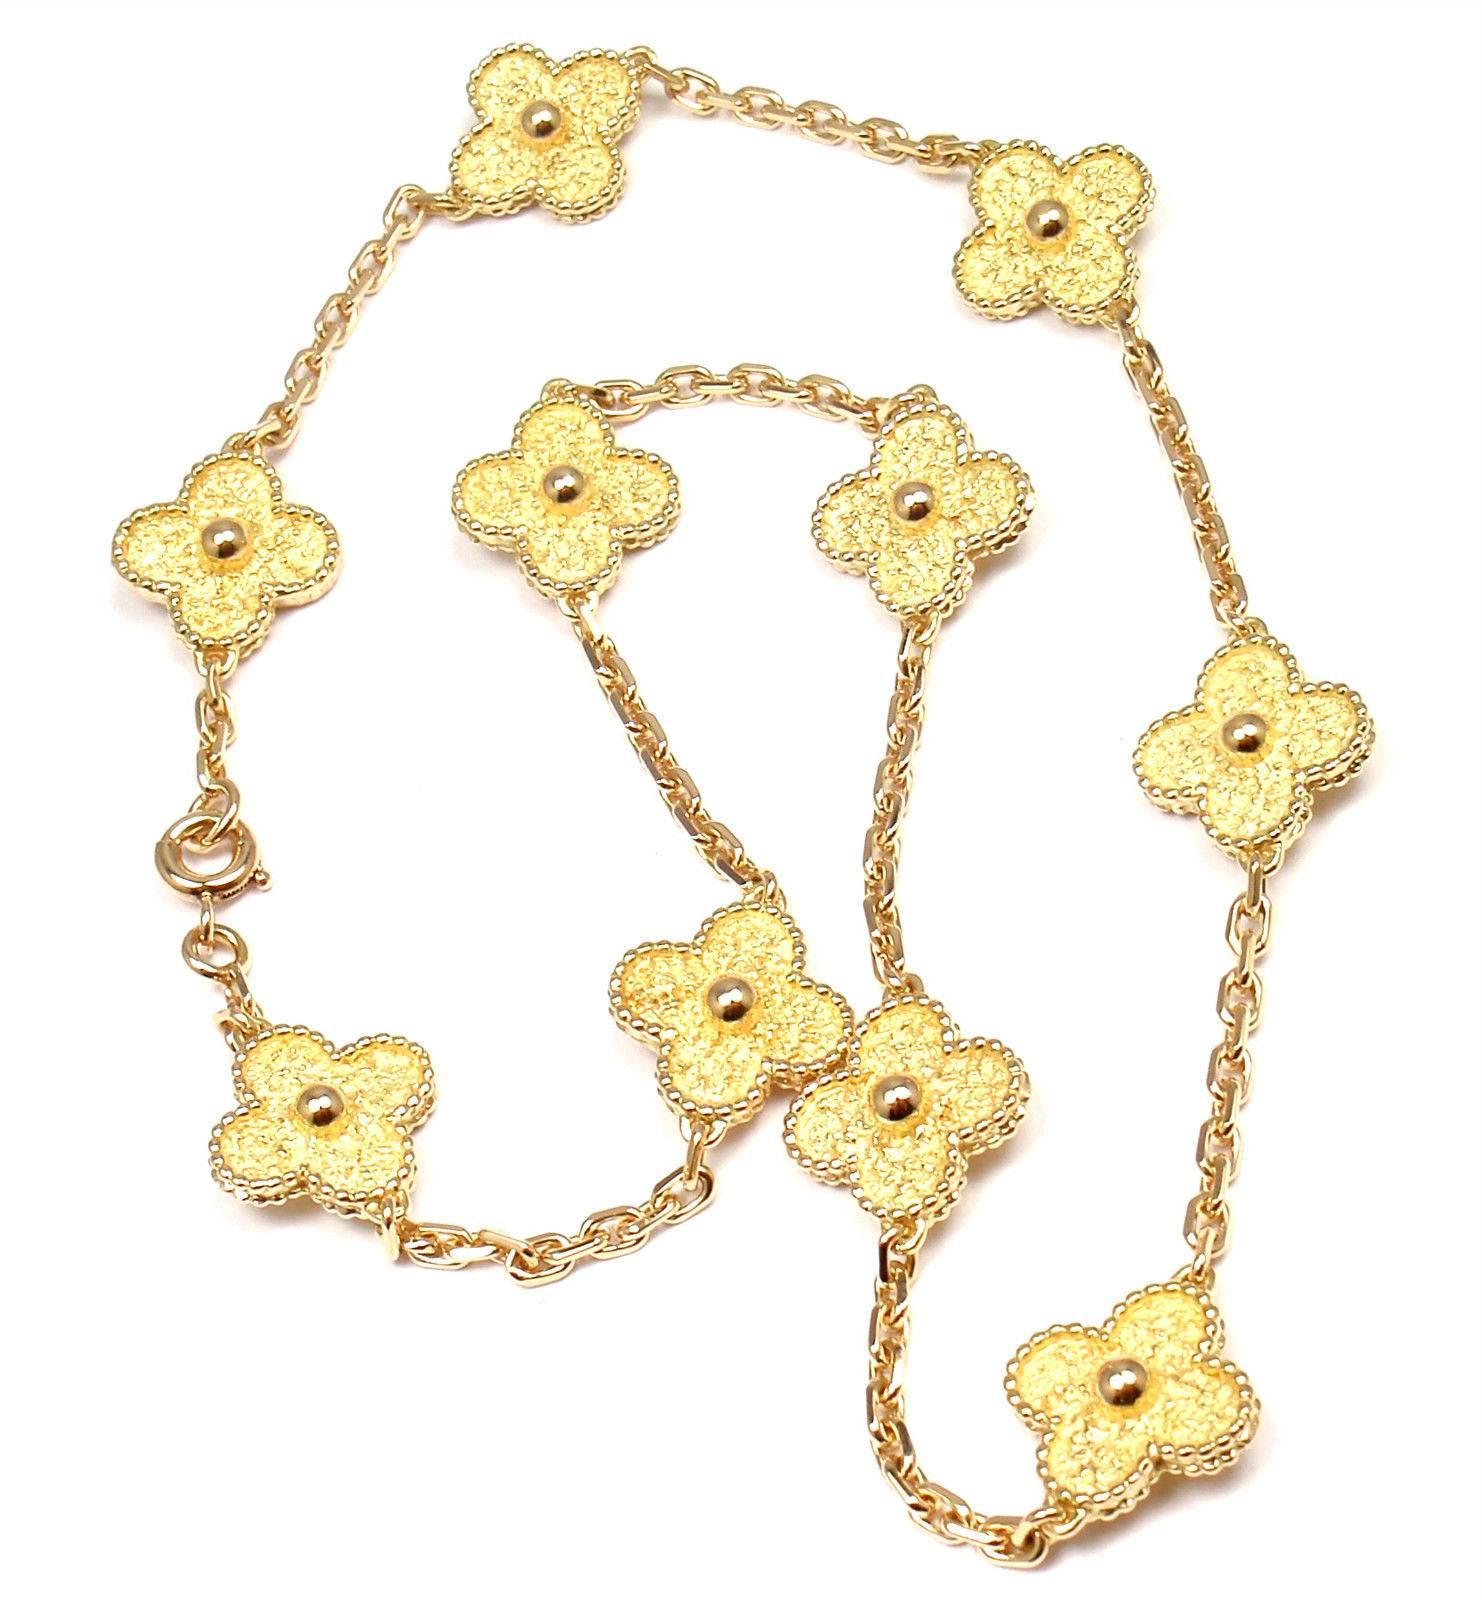 18k Yellow Gold Vintage Alhambra 10 Motif Necklace by Van Cleef & Arpels.
With 10 gold alhambra motifs 14mm each
Details:
Length: 16